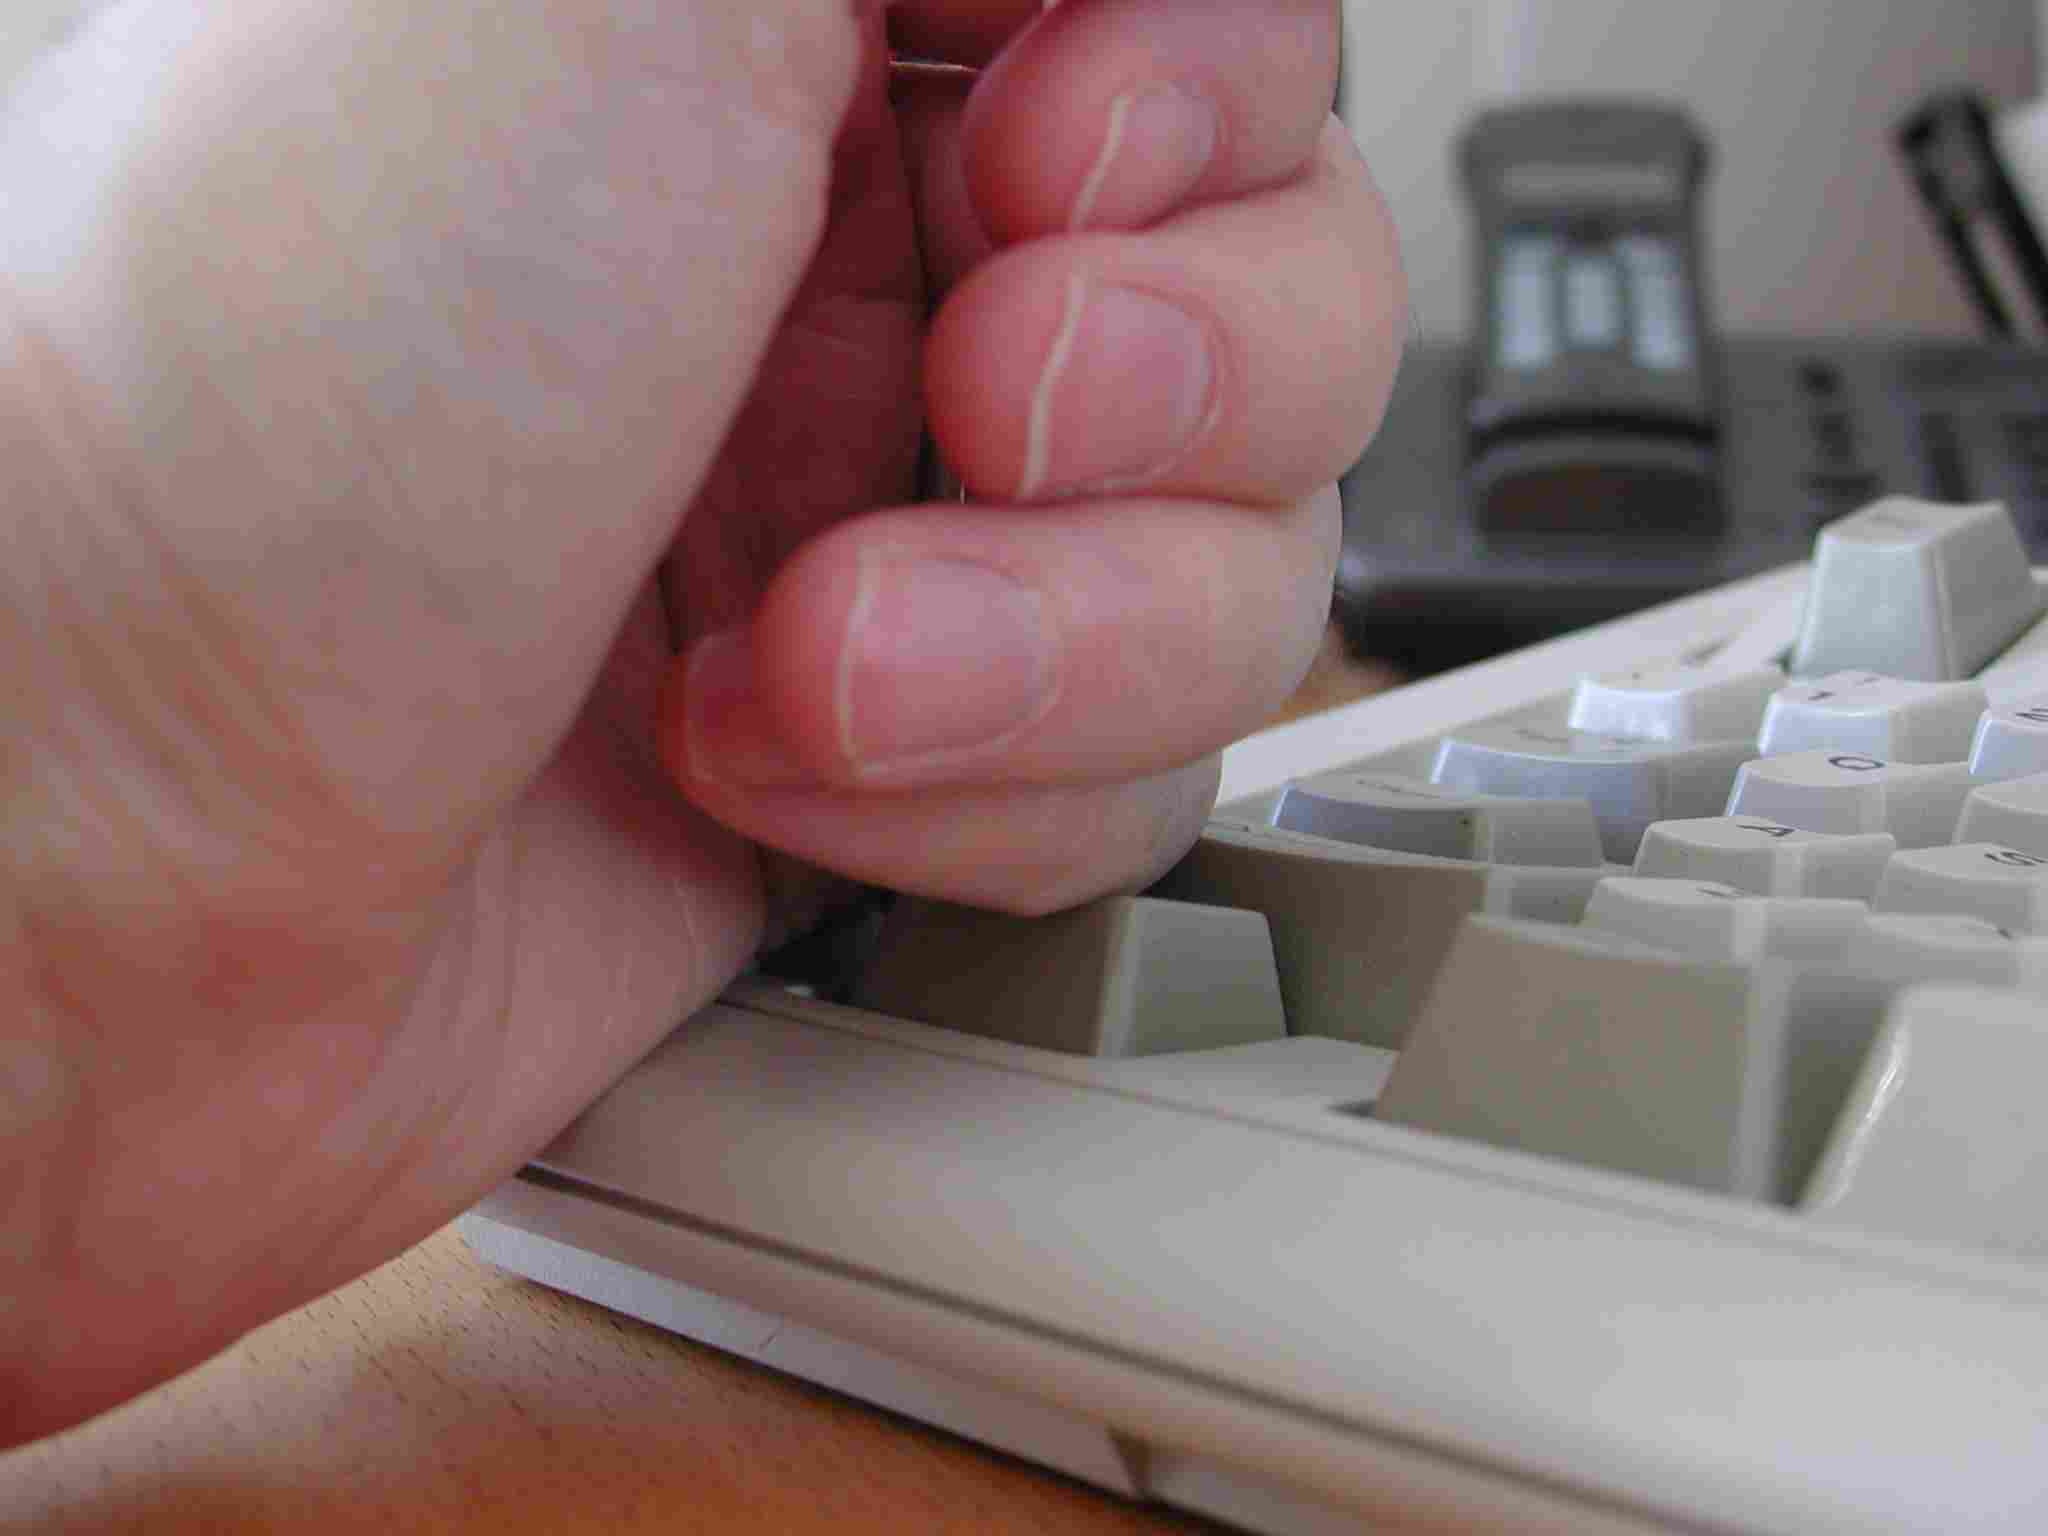 Pressing modifier       keys without strained uses of fingers